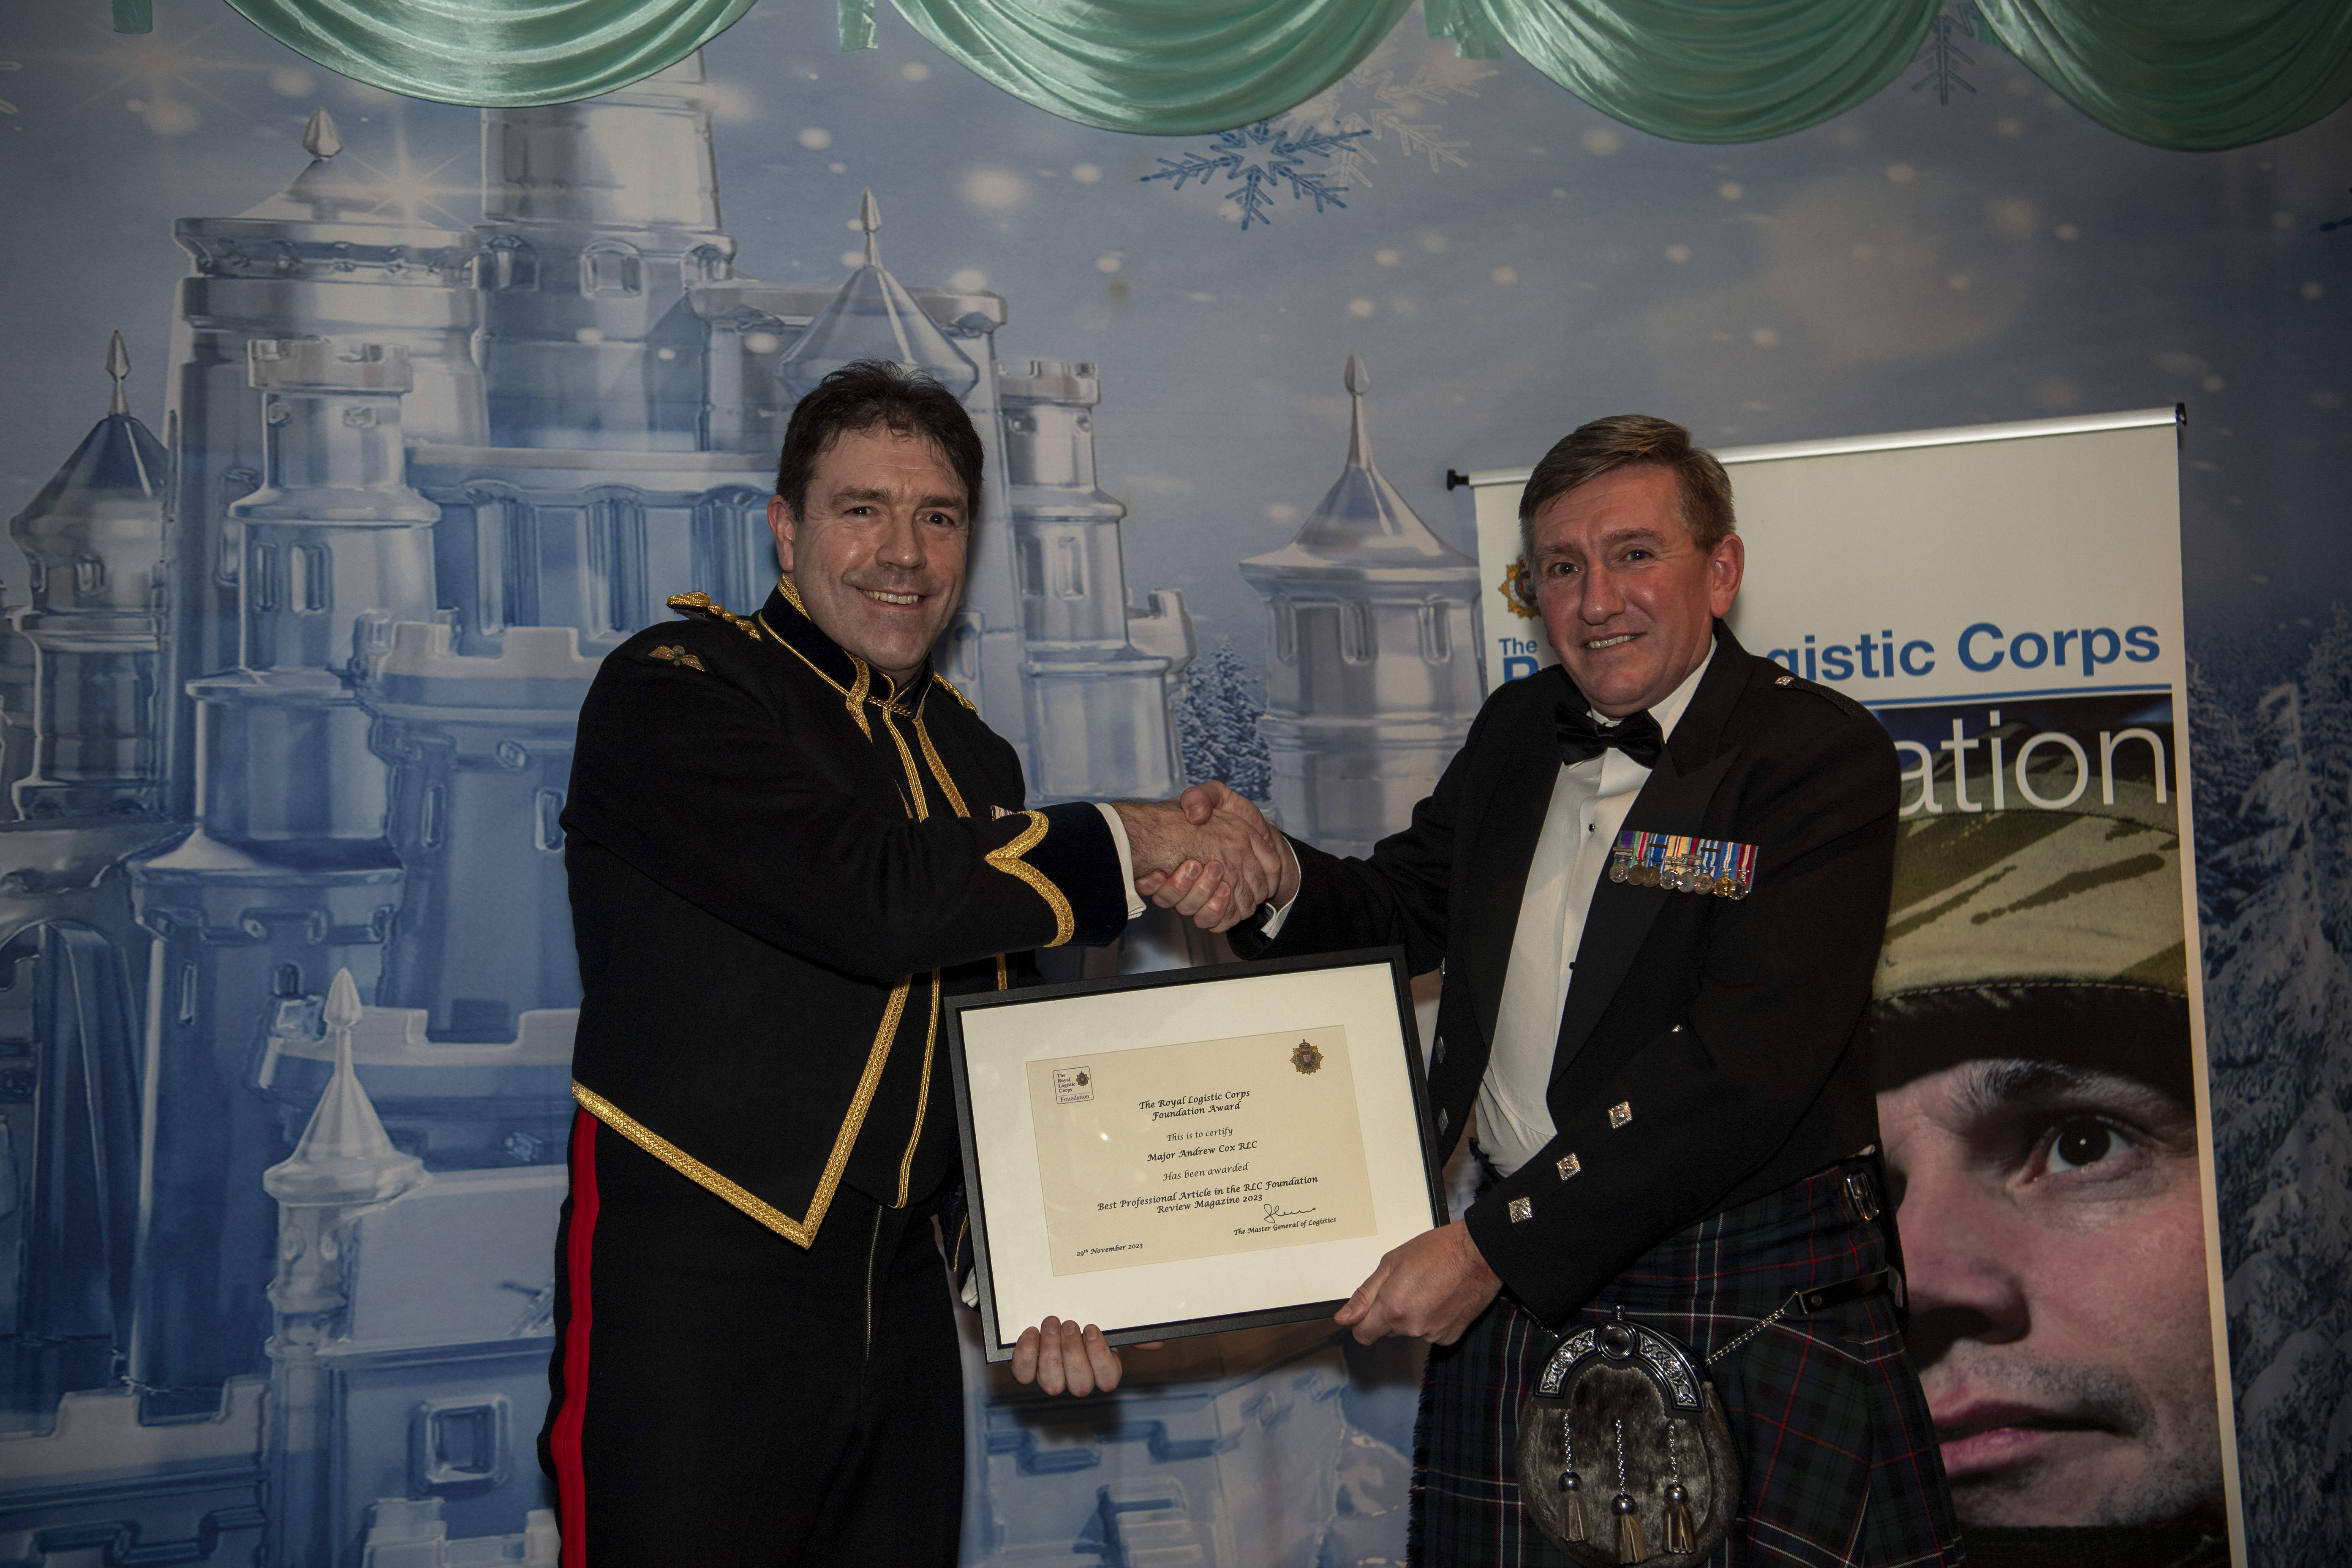 Maj Andrew Cox Best Proffessional Article and Award Sponsor Mr T Kay Kuehne and Nagel